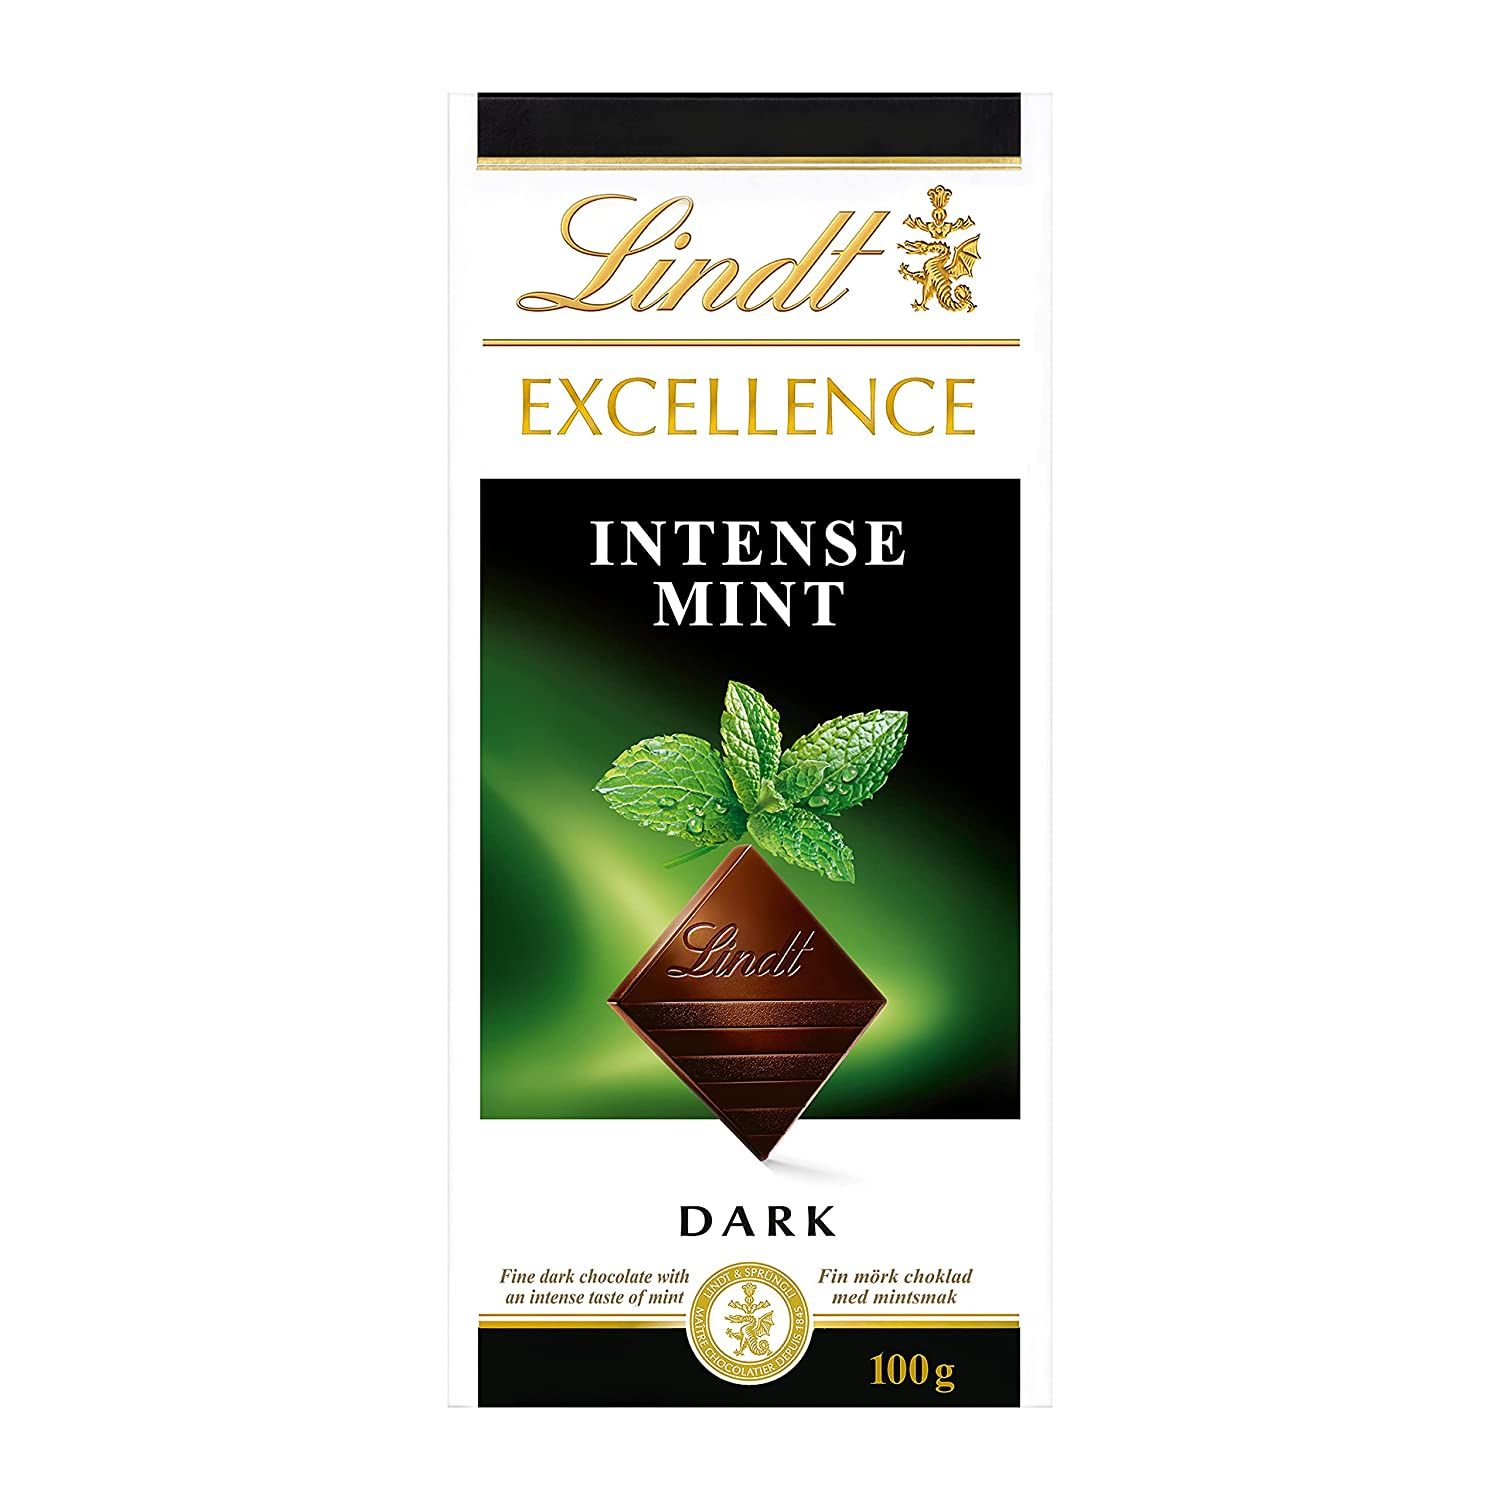 Lindt Excellence Mint Intense Chocolate Image